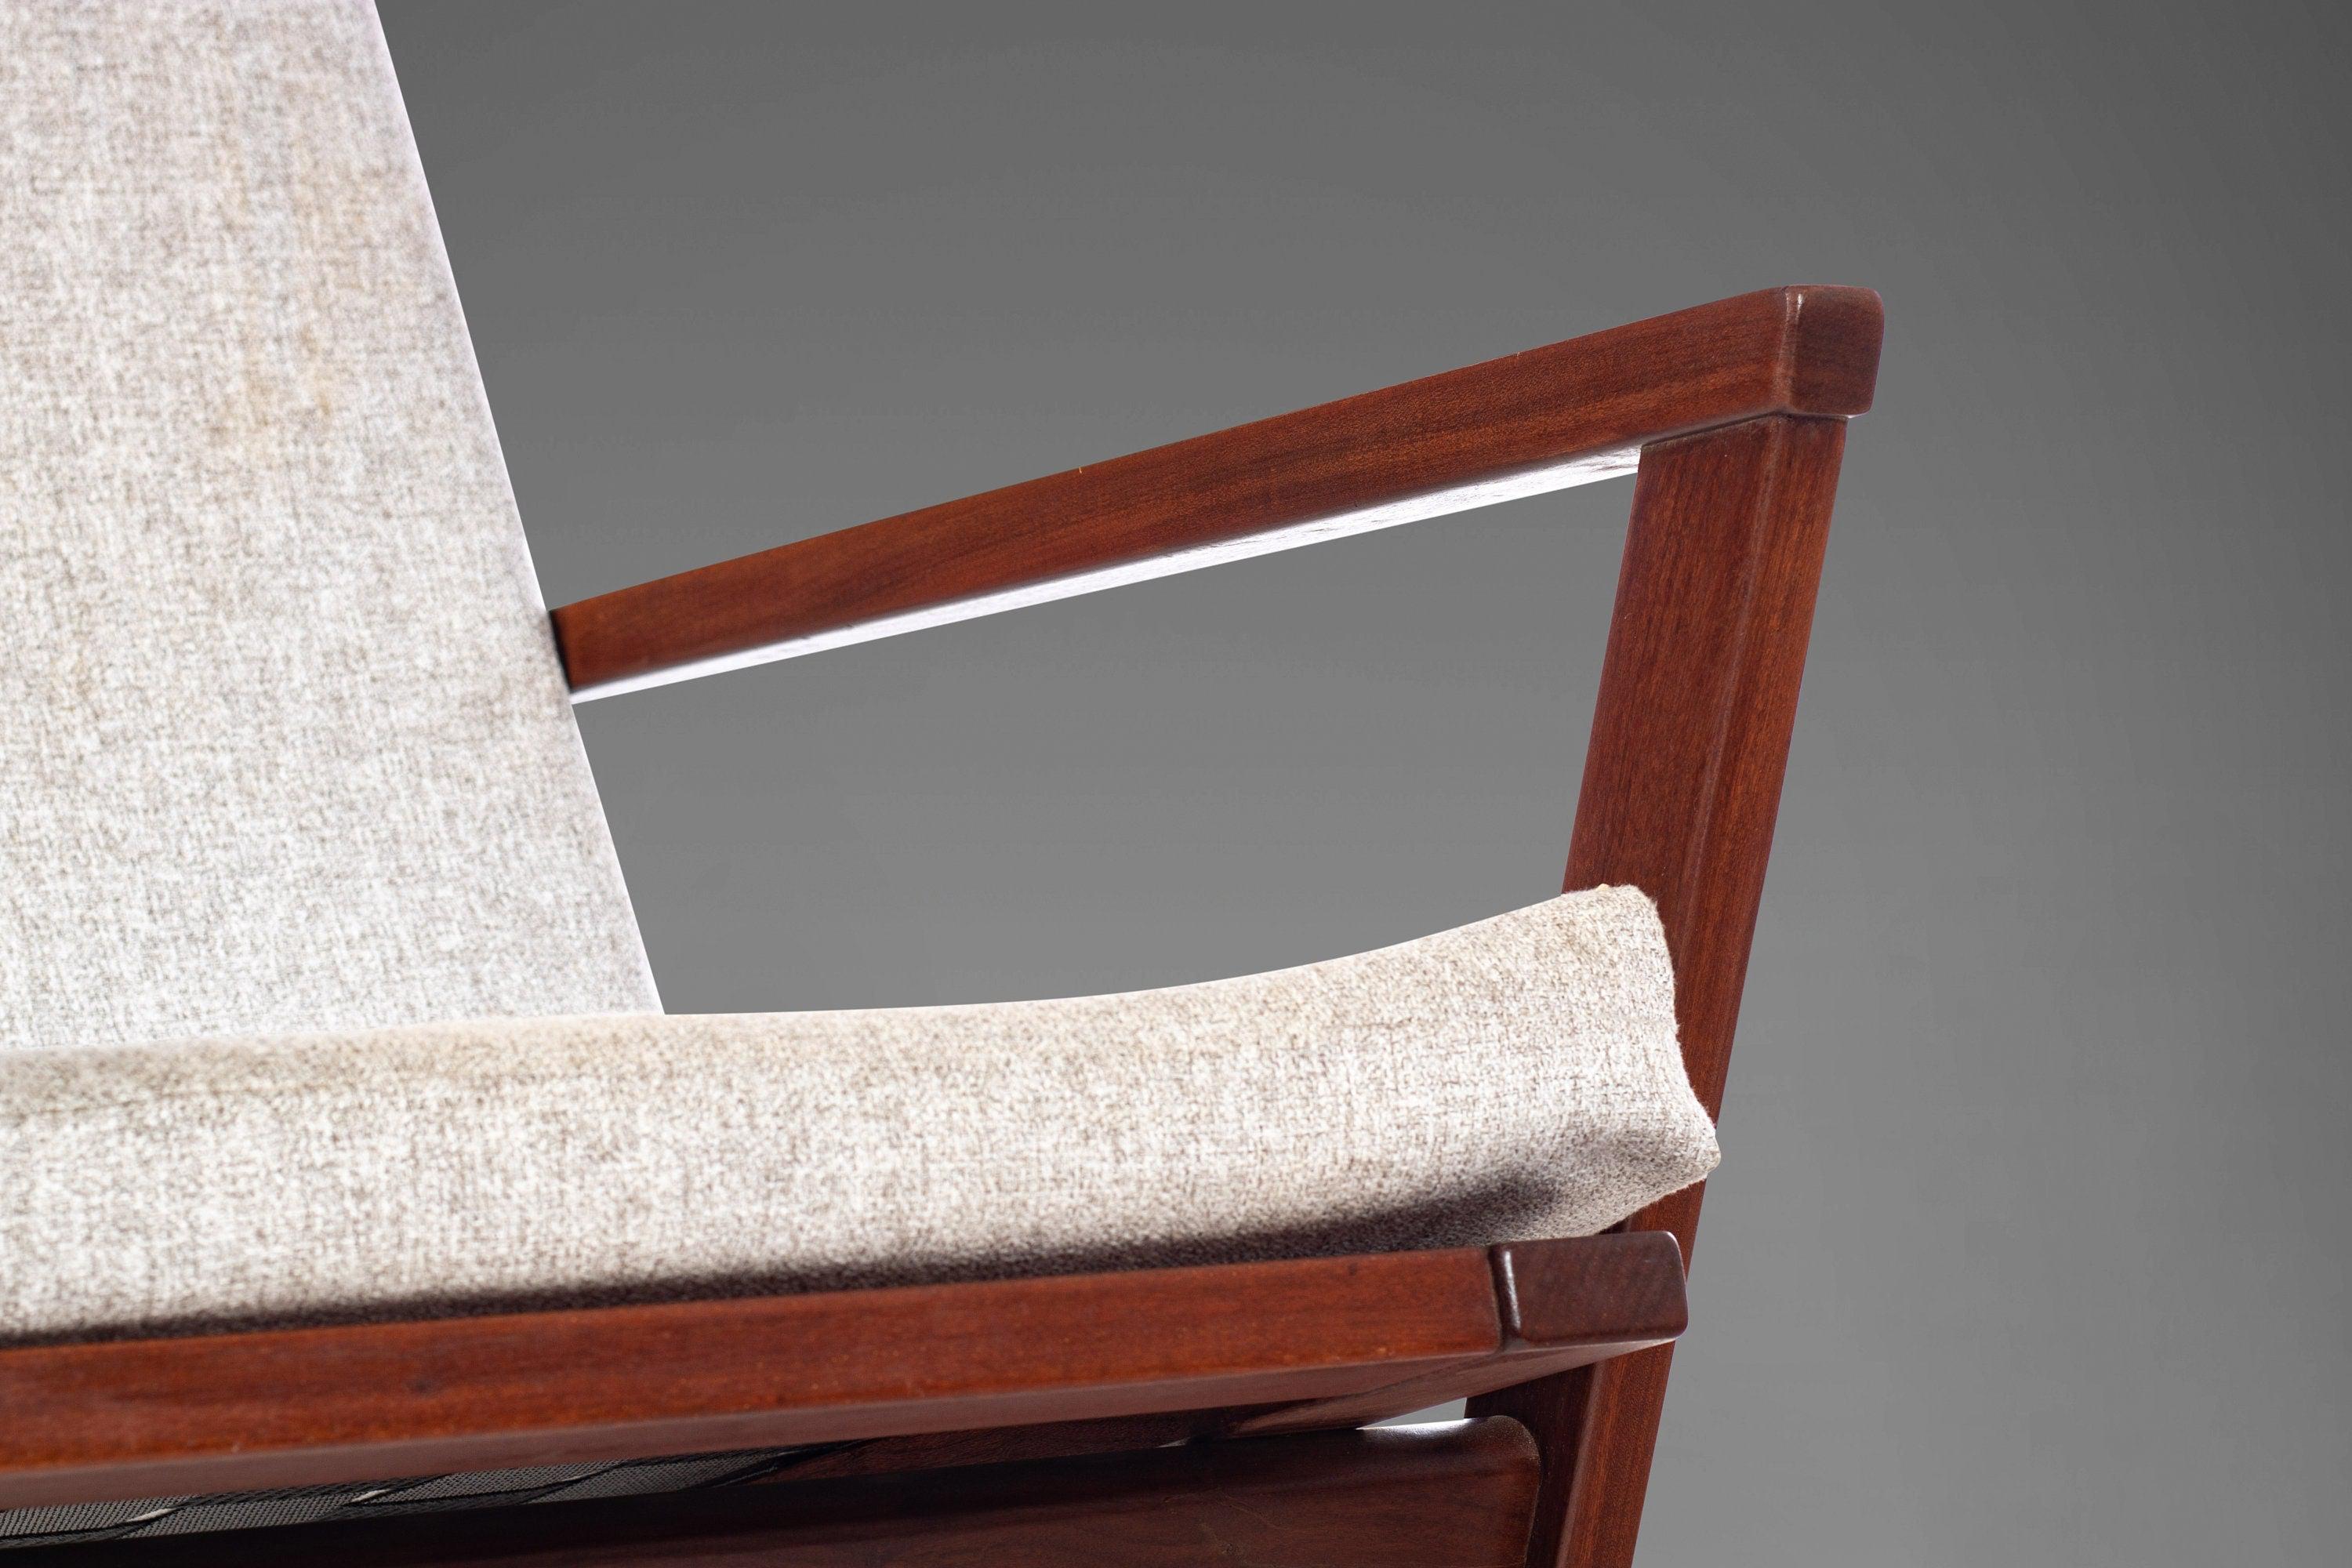 Wood Rocking Chair by Poul Volther for Frem Rojle in Afromosia, New Fabric, c. 1960s For Sale